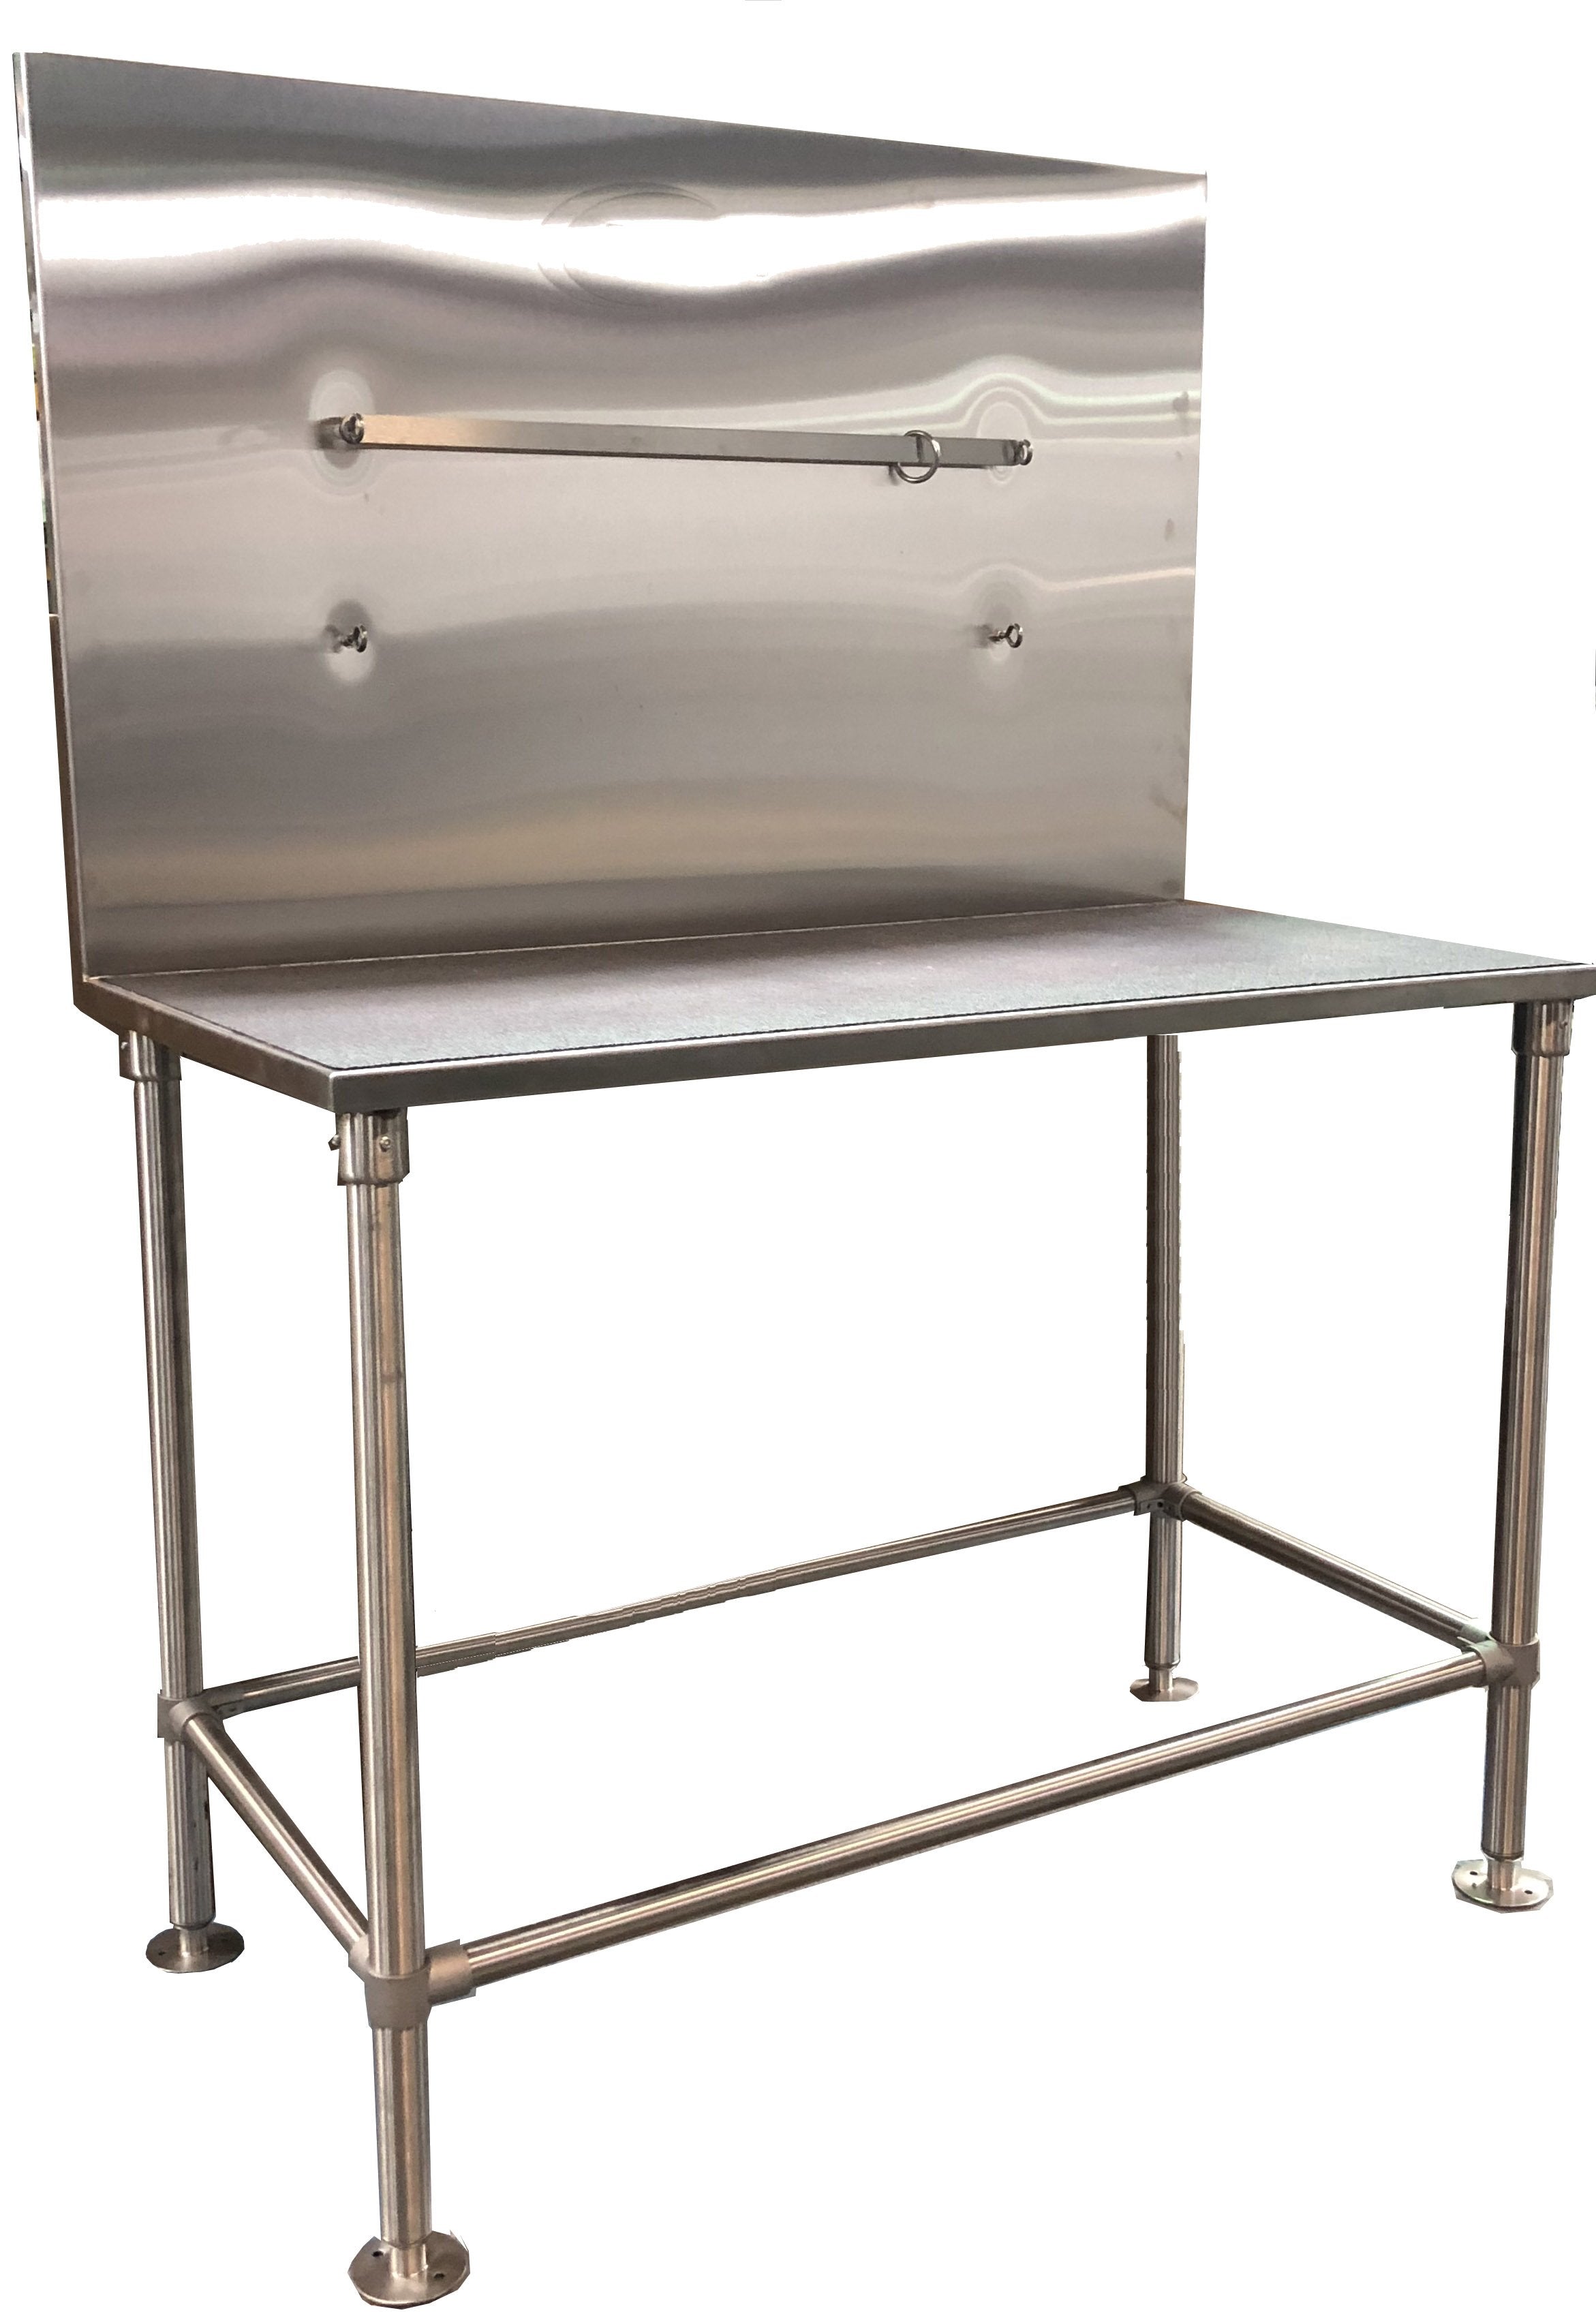 PetLift Stainless Steel Drying Table with optional integrated K-9 II Dog Grooming Dryer